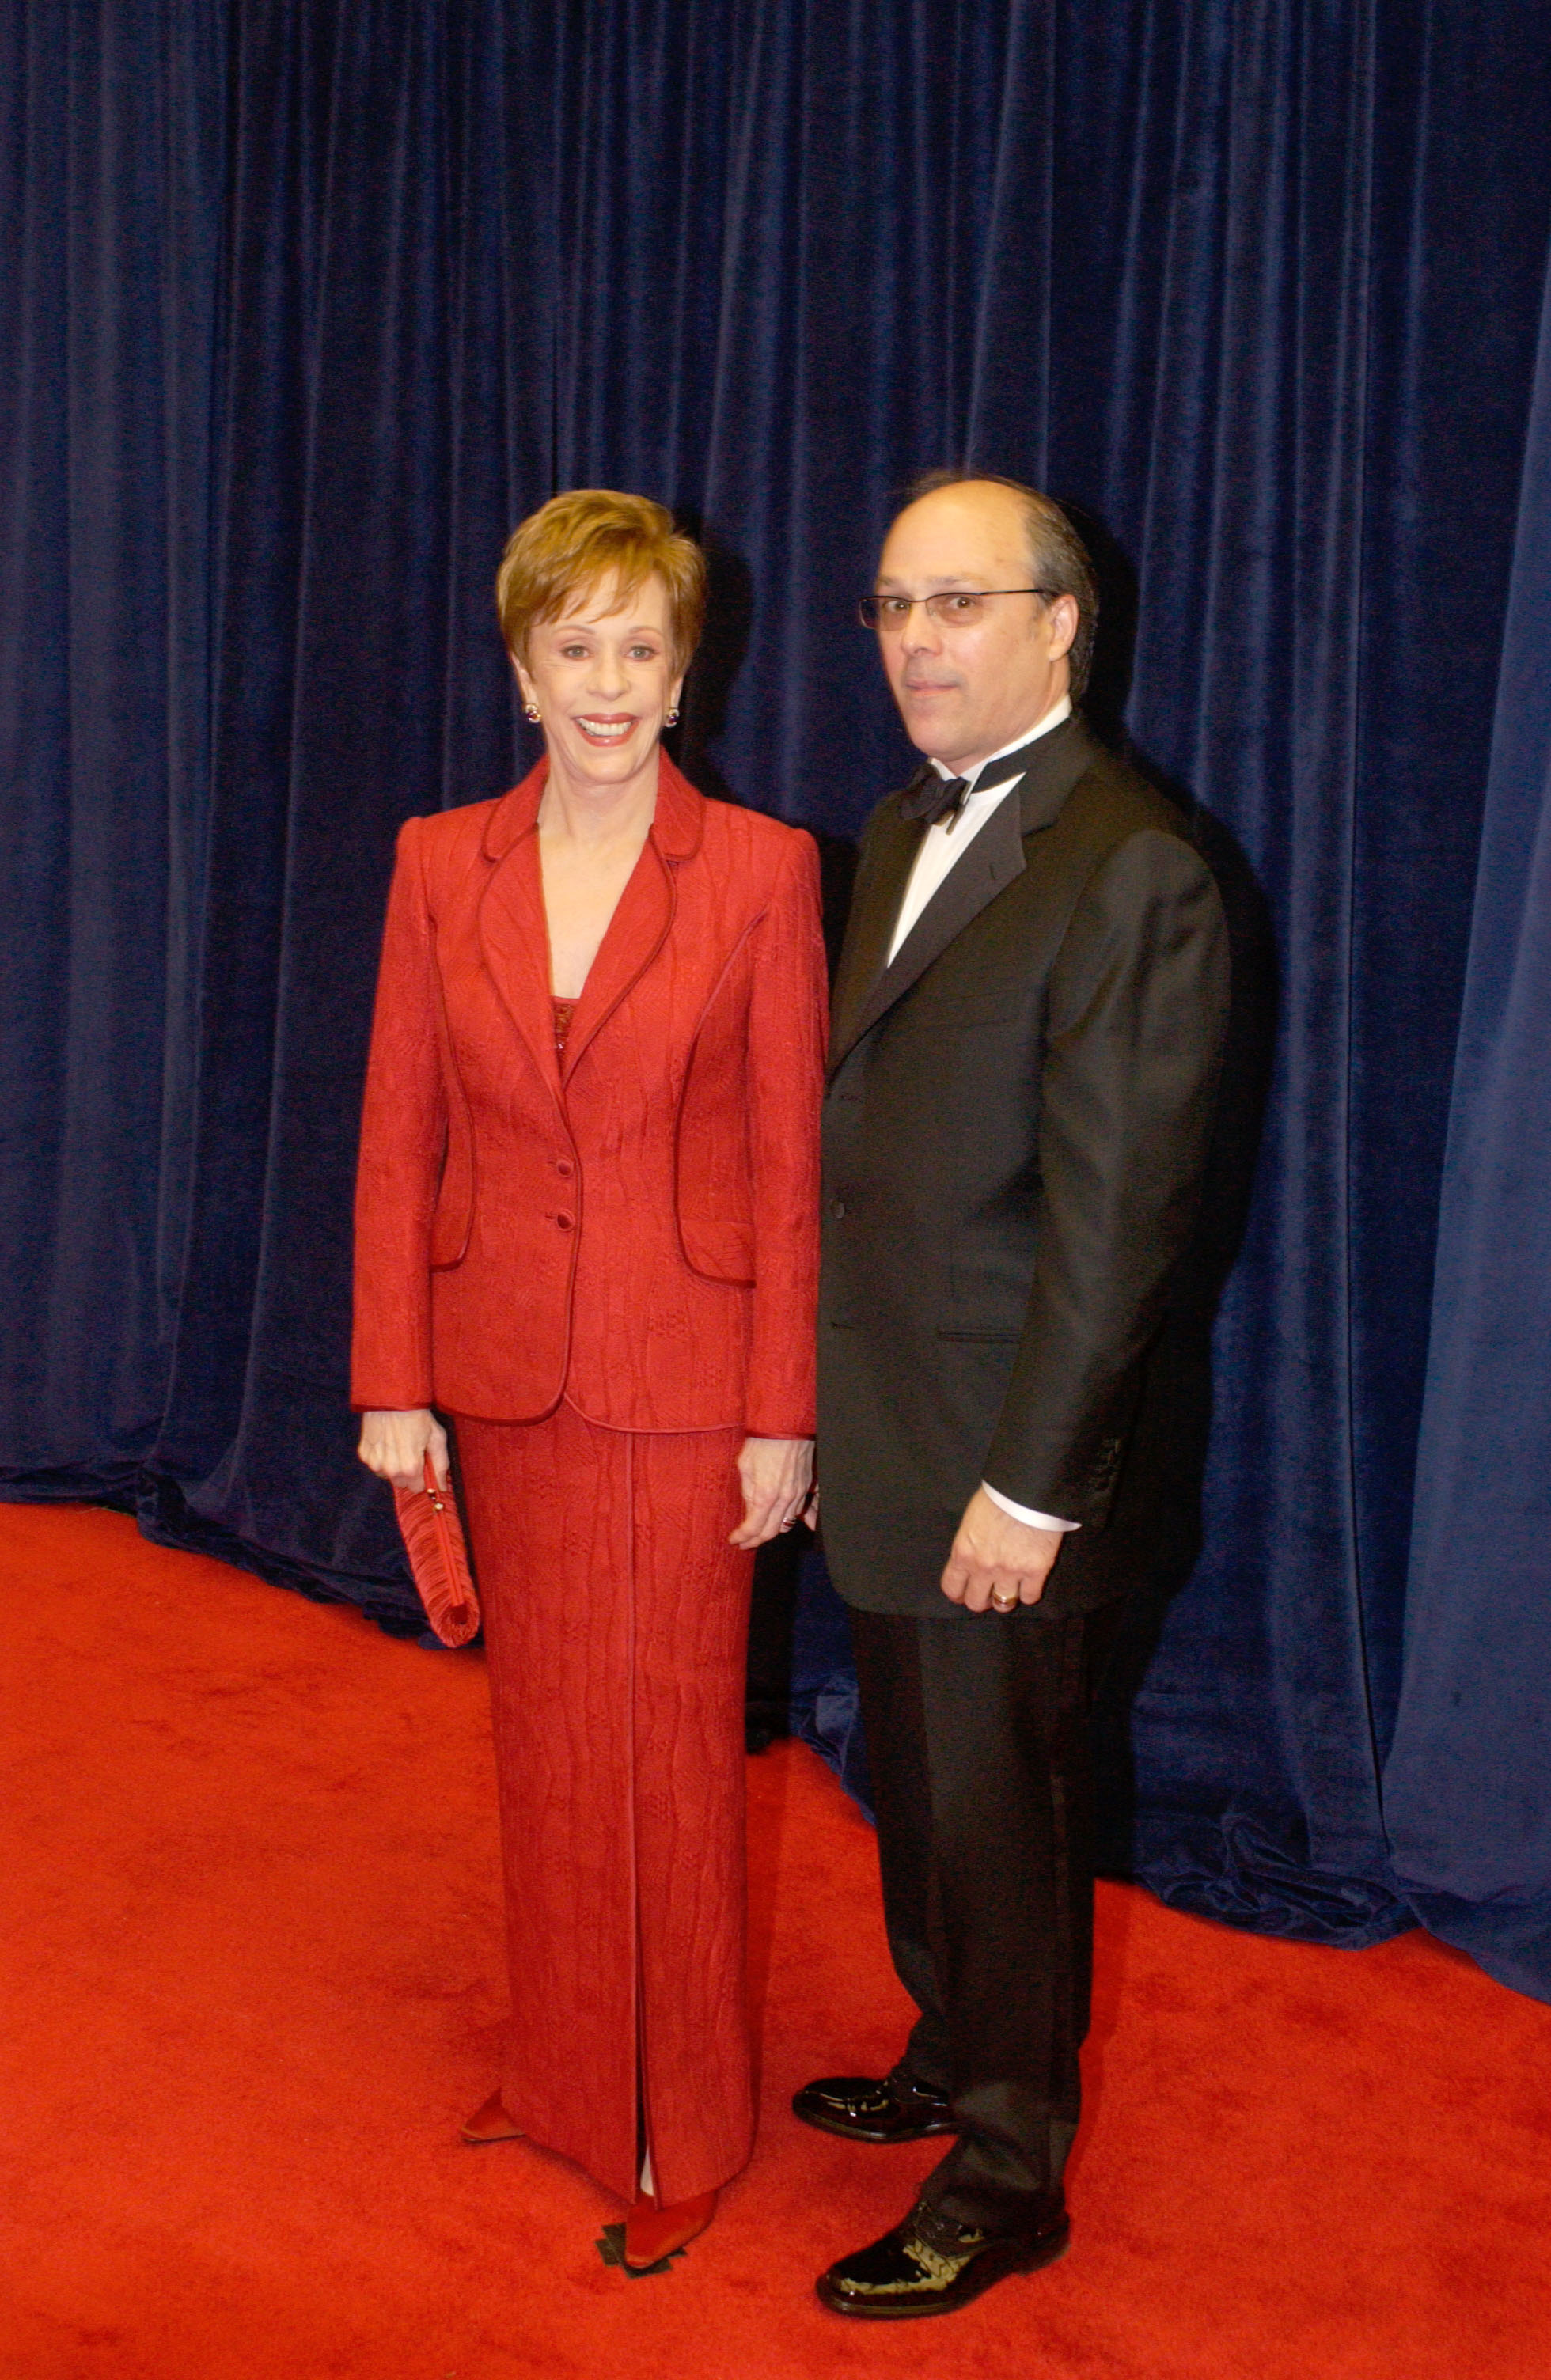 Carol Burnett and her husband Brian Miller arrive at the Honorees' Dinner on December 6, 2003 | Source: Getty Images